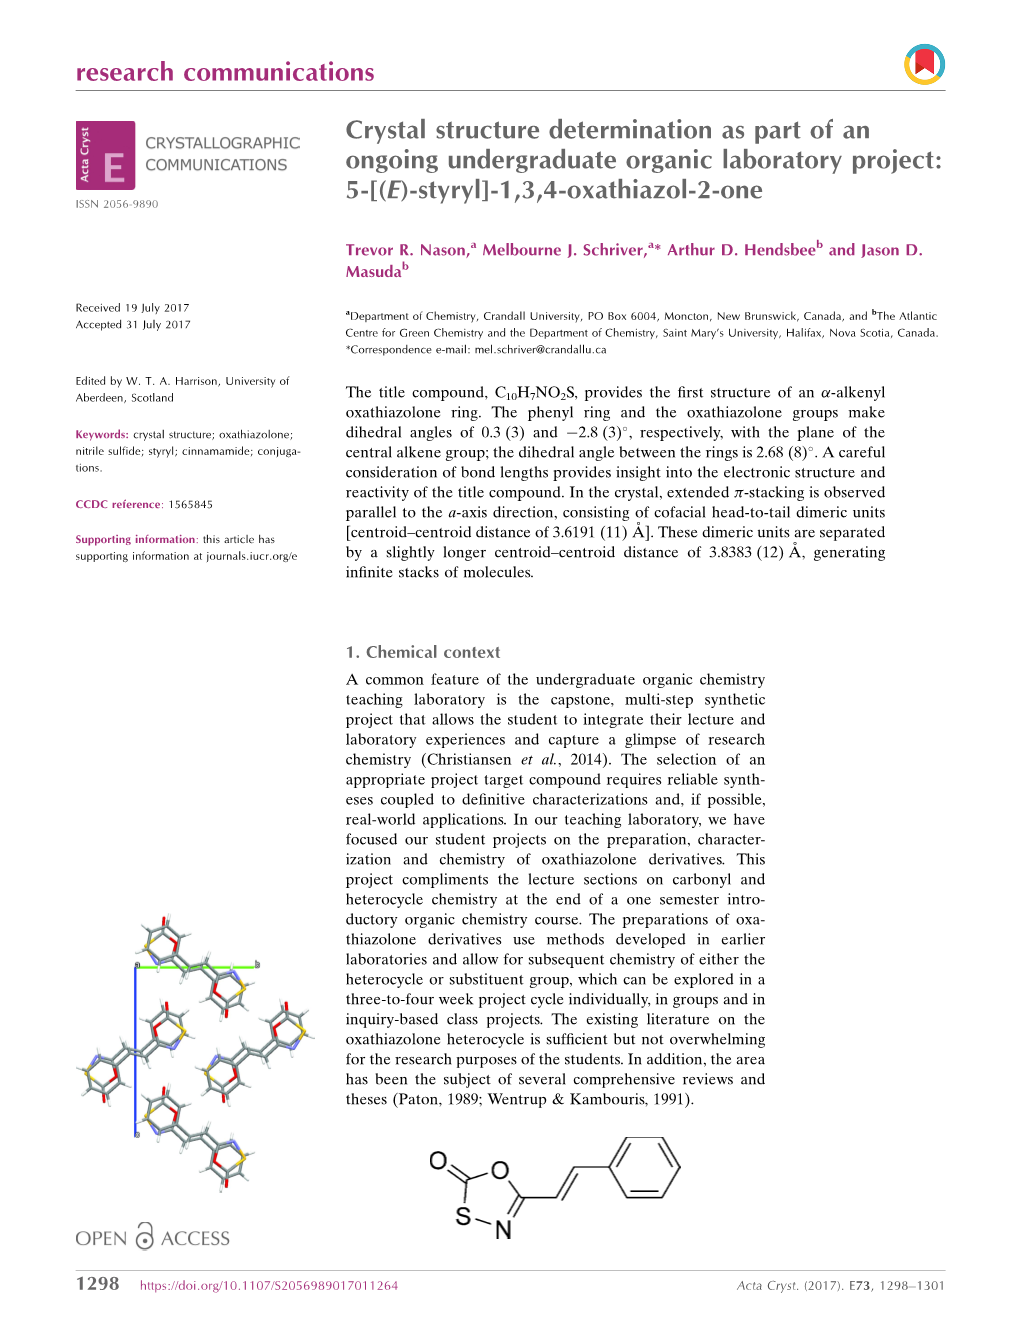 Crystal Structure Determination As Part of an Ongoing Undergraduate Organic Laboratory Project: 5-[(E)-Styryl]-1,3,4-Oxathiazol-2-One ISSN 2056-9890